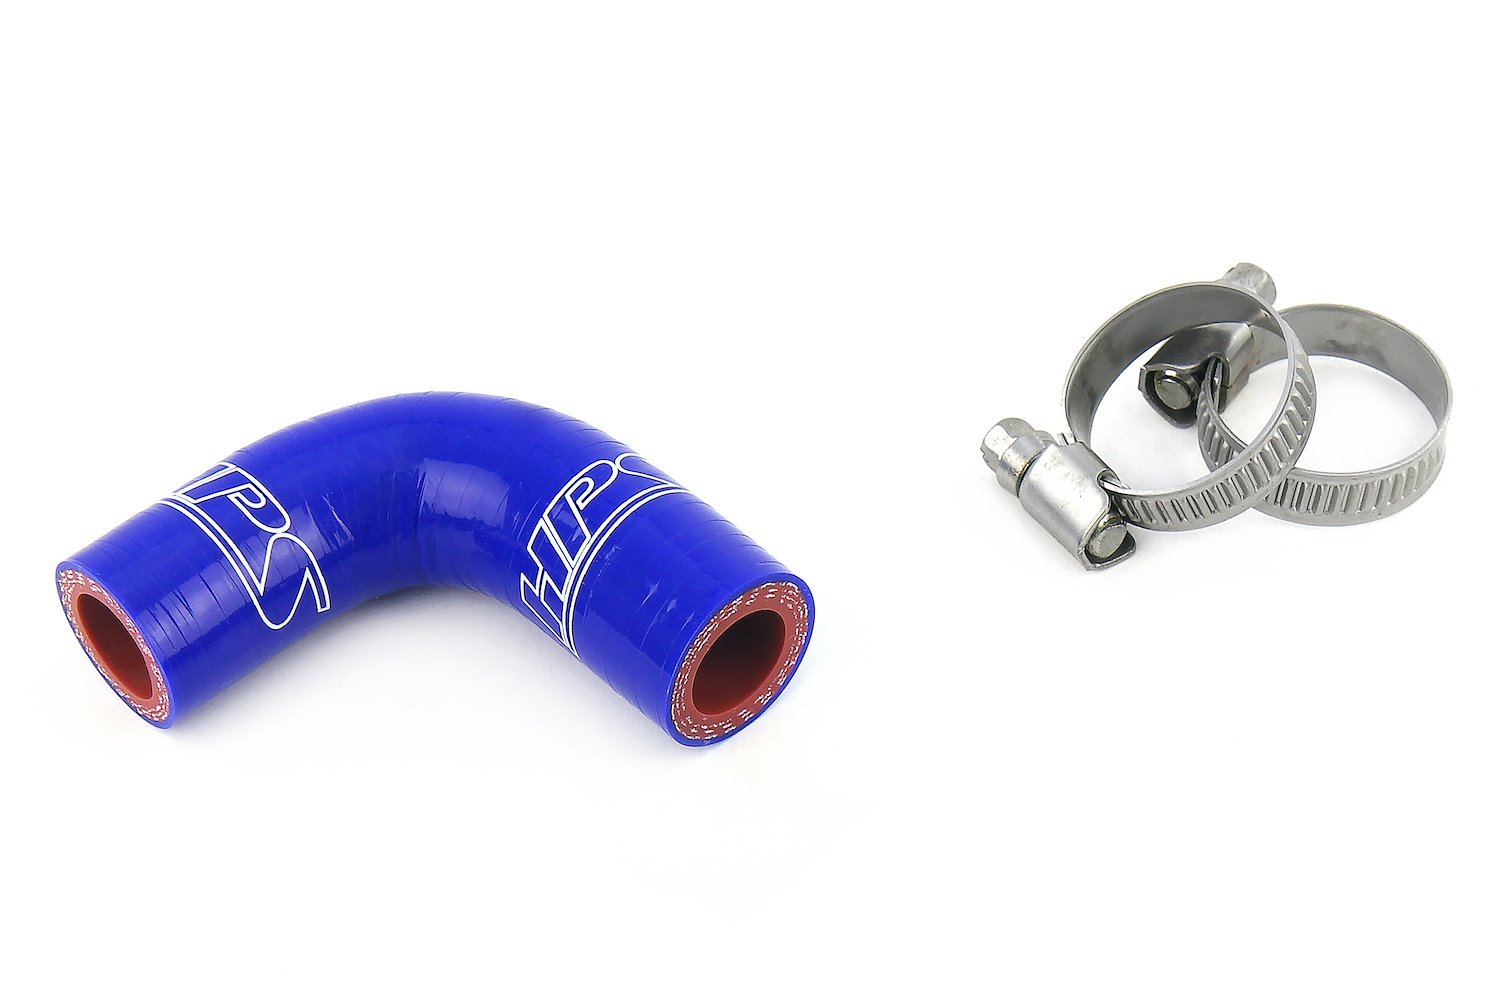 57-1881-BLUE Silicone Coolant Hose Kit, 3-Ply Reinforced Silicone, Replaces Rubber Heater & Transmission Coolant Hoses